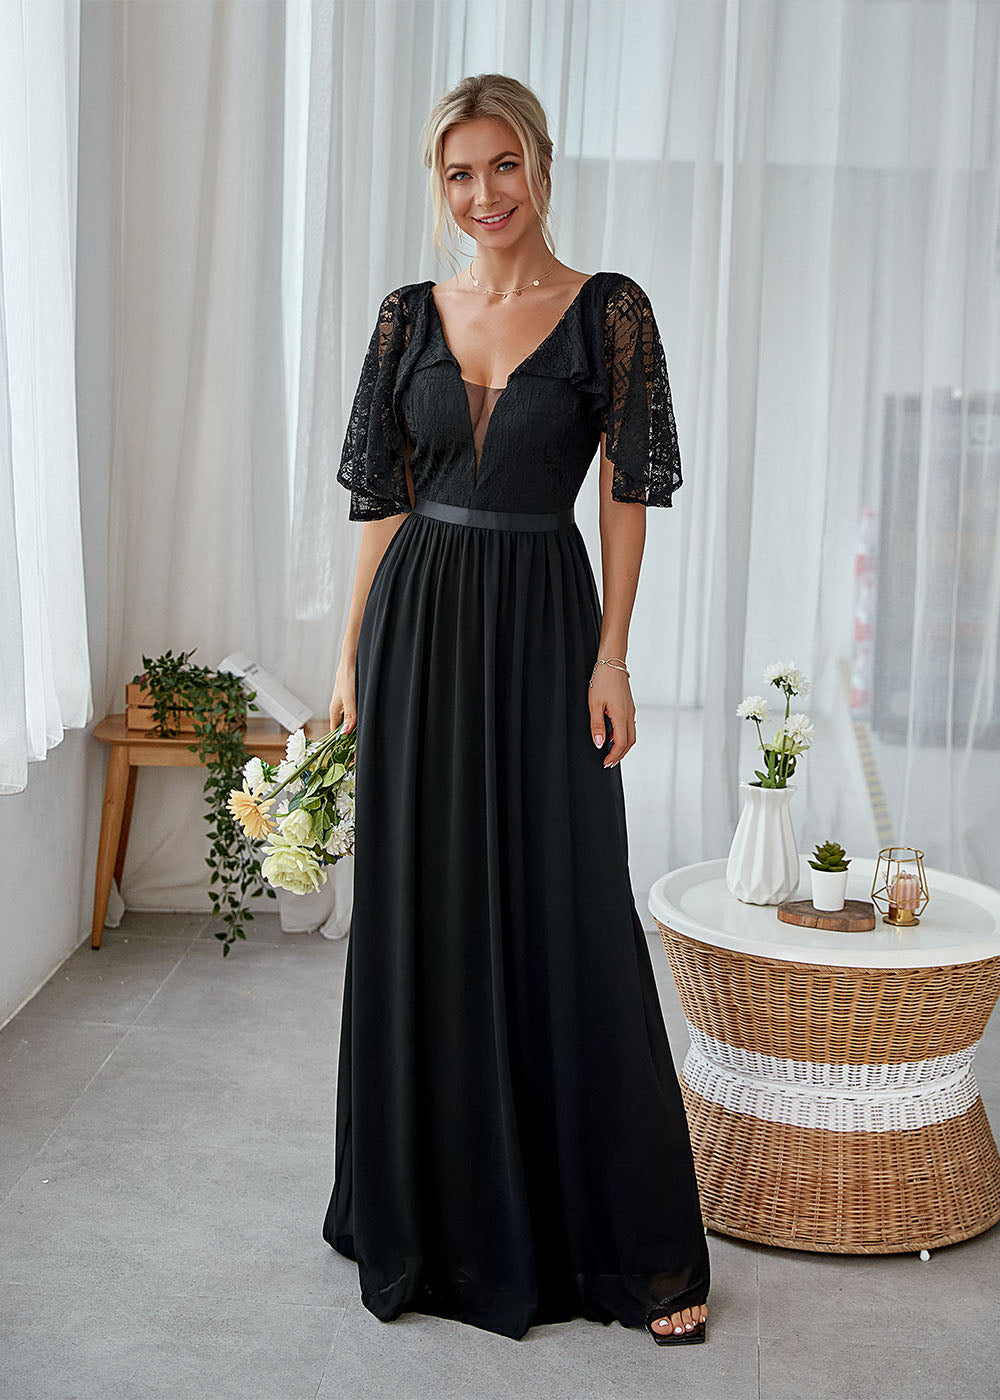 Black Chiffon V-neck A-line Bridesmaid Dress with Lace Sleeves